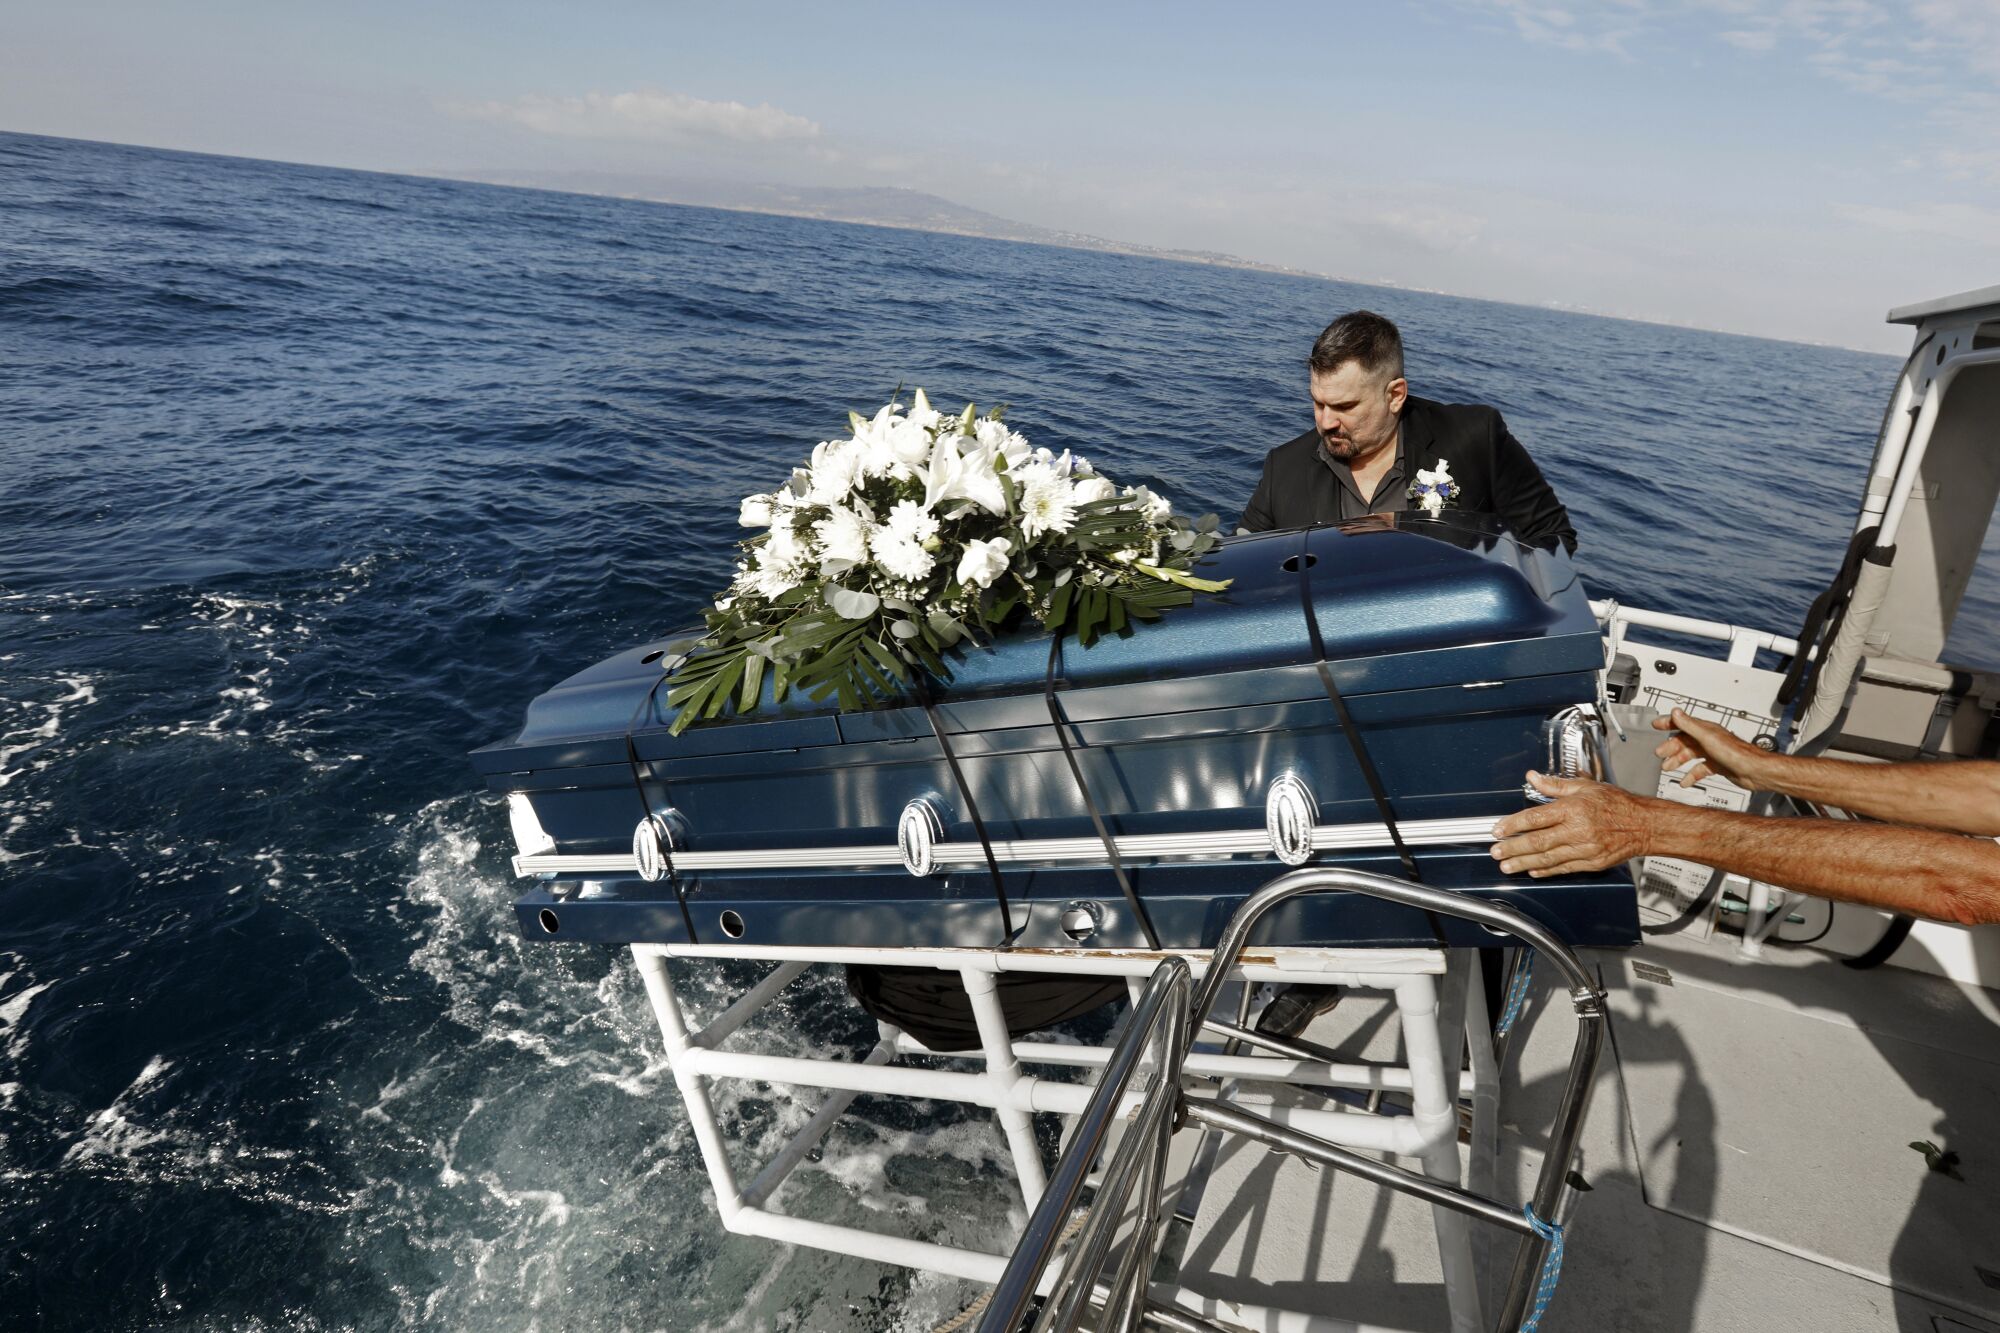 Full body burials at sea are becoming more popular - Los Angeles Times